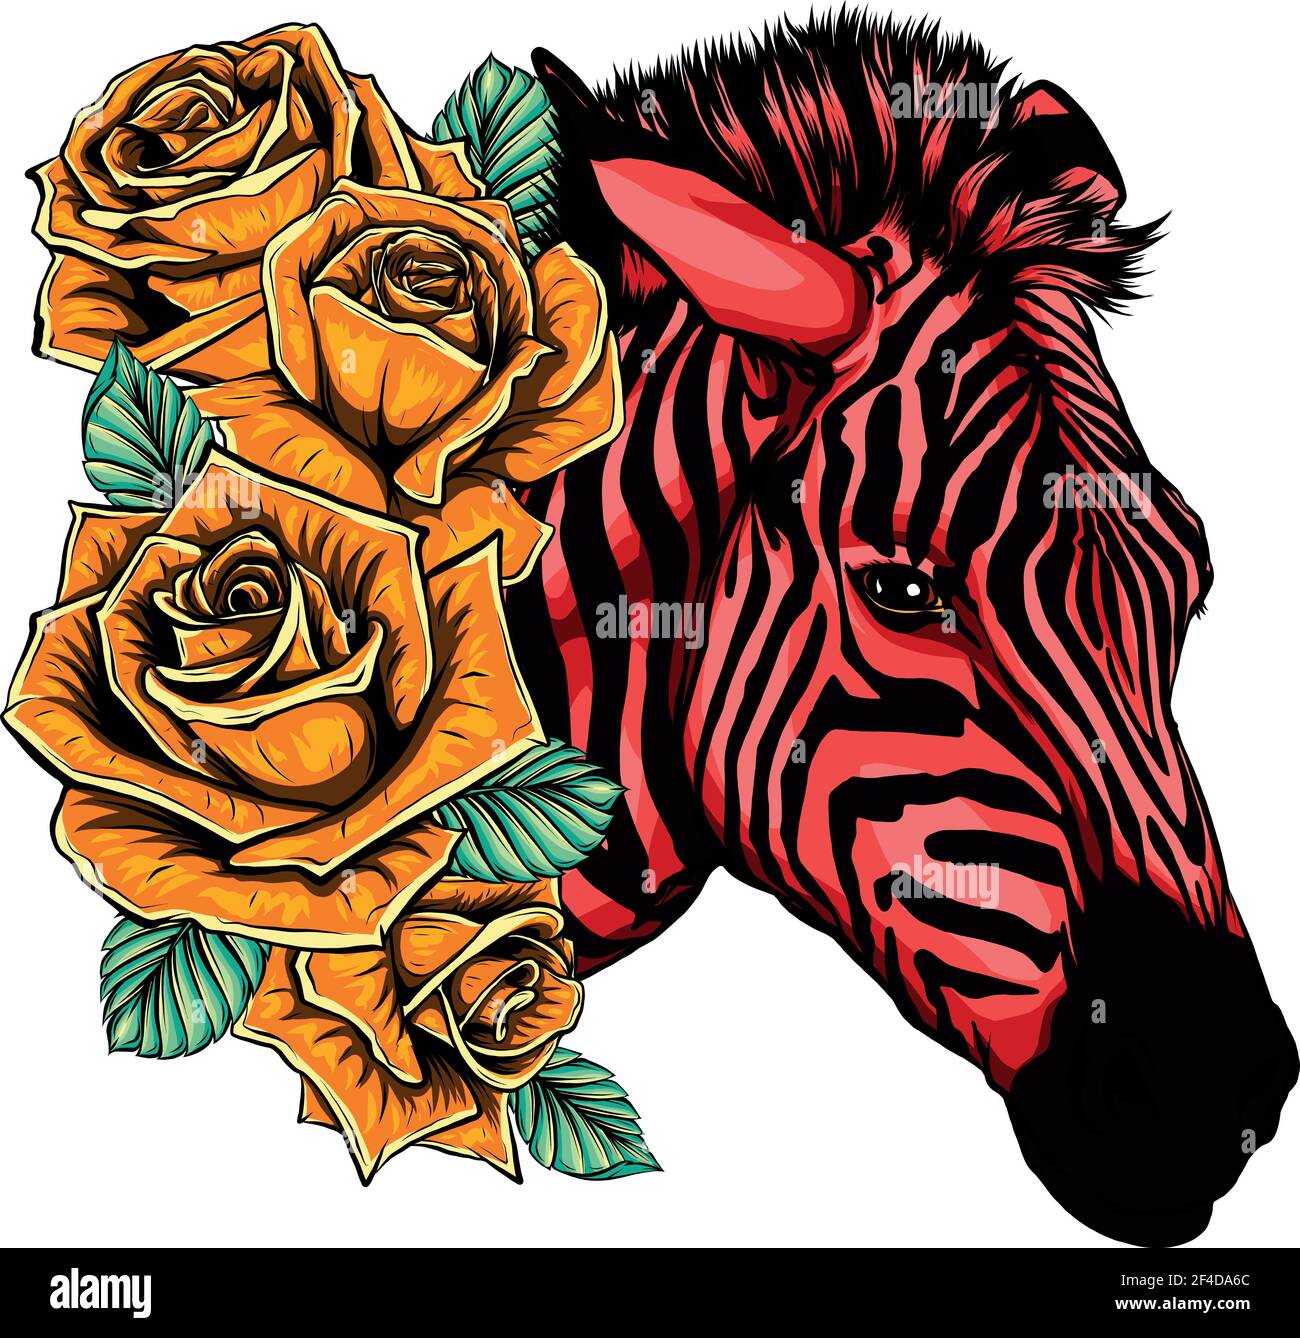 vector illustration with cute red zebra with yellow roses Stock Vector